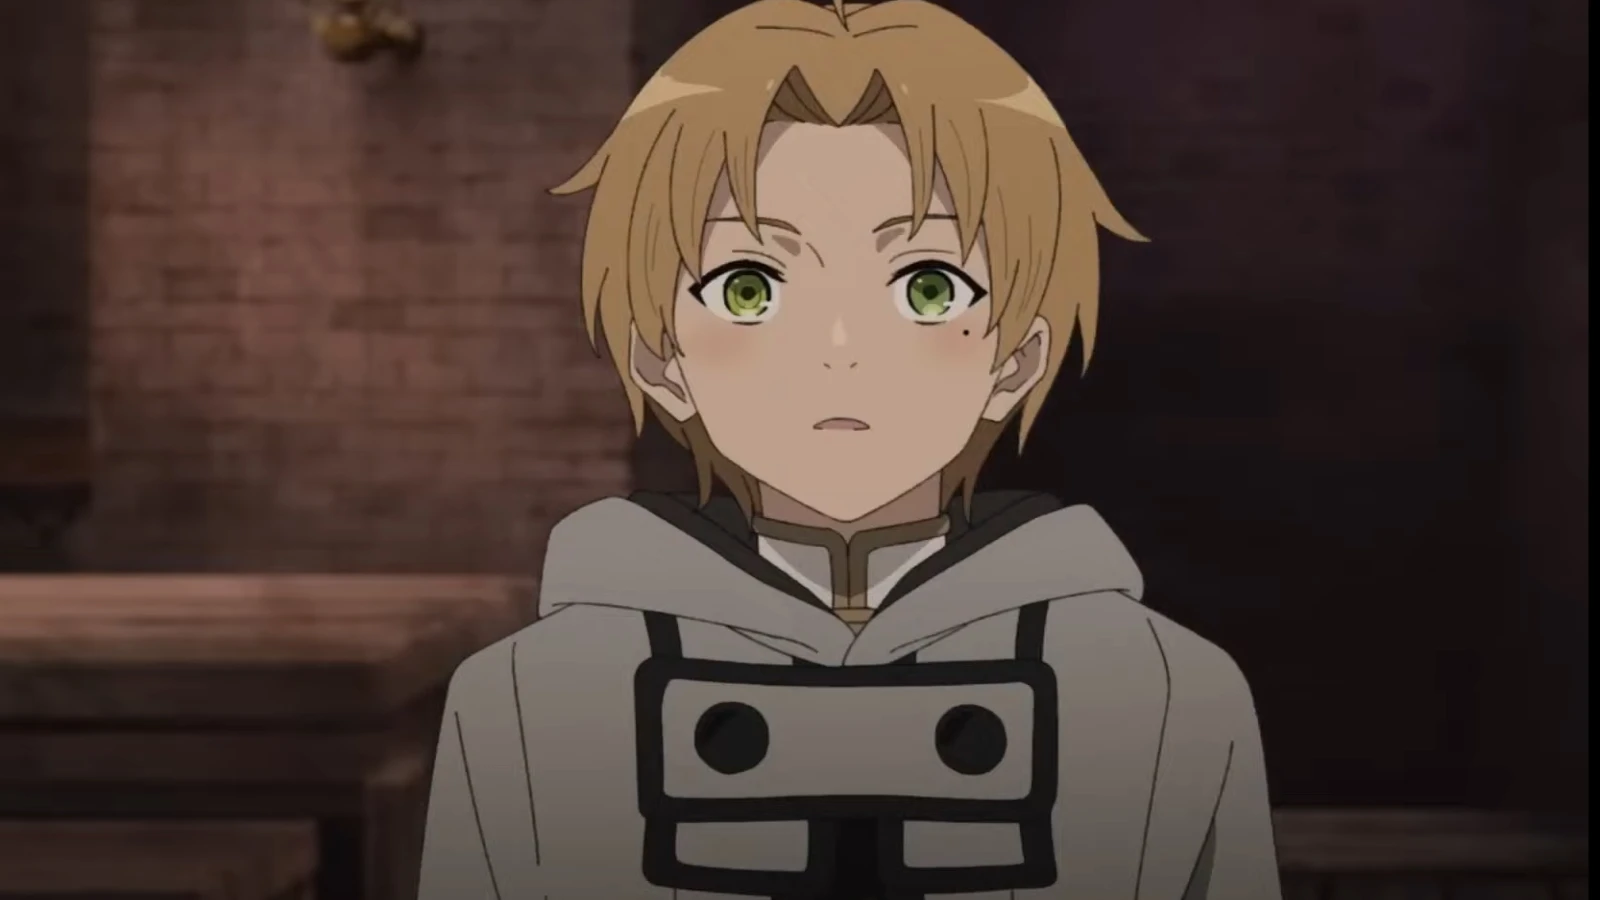 Mushoku Tensei Season 2 Release Date and When Is It Coming Out